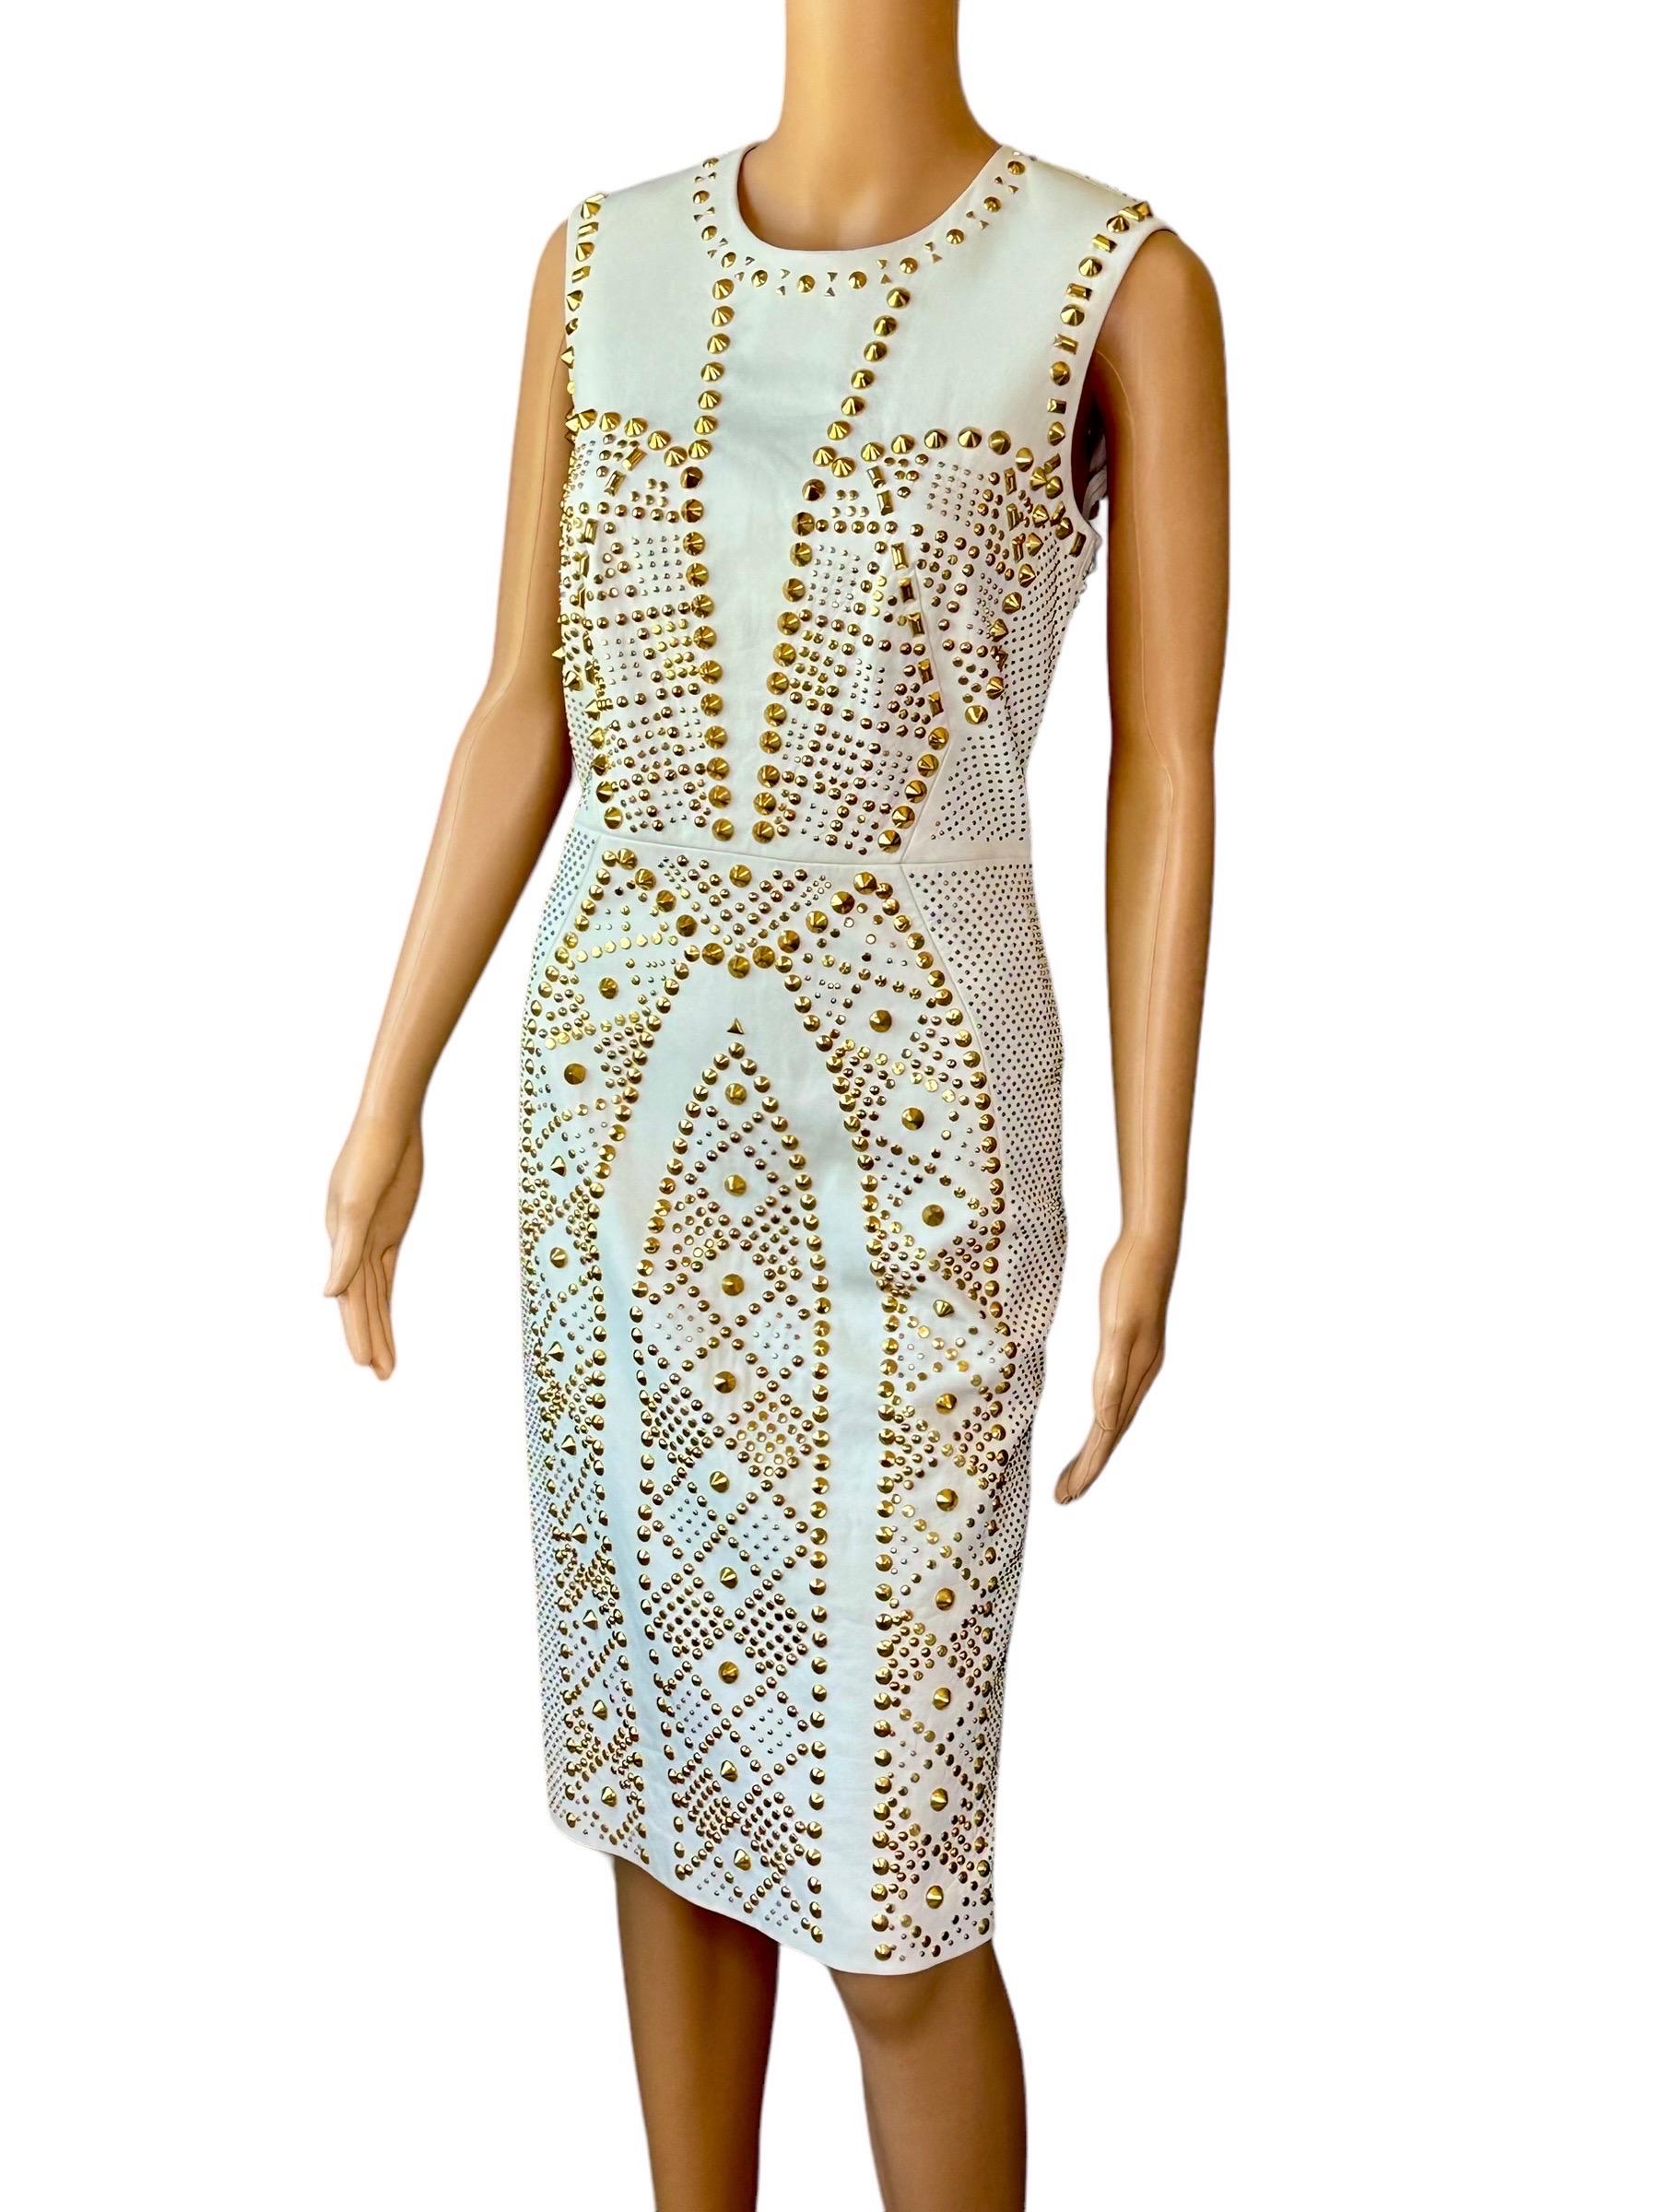 Versace S/S 2012 Runway Embellished Gold Studded Ivory Leather Dress  For Sale 1